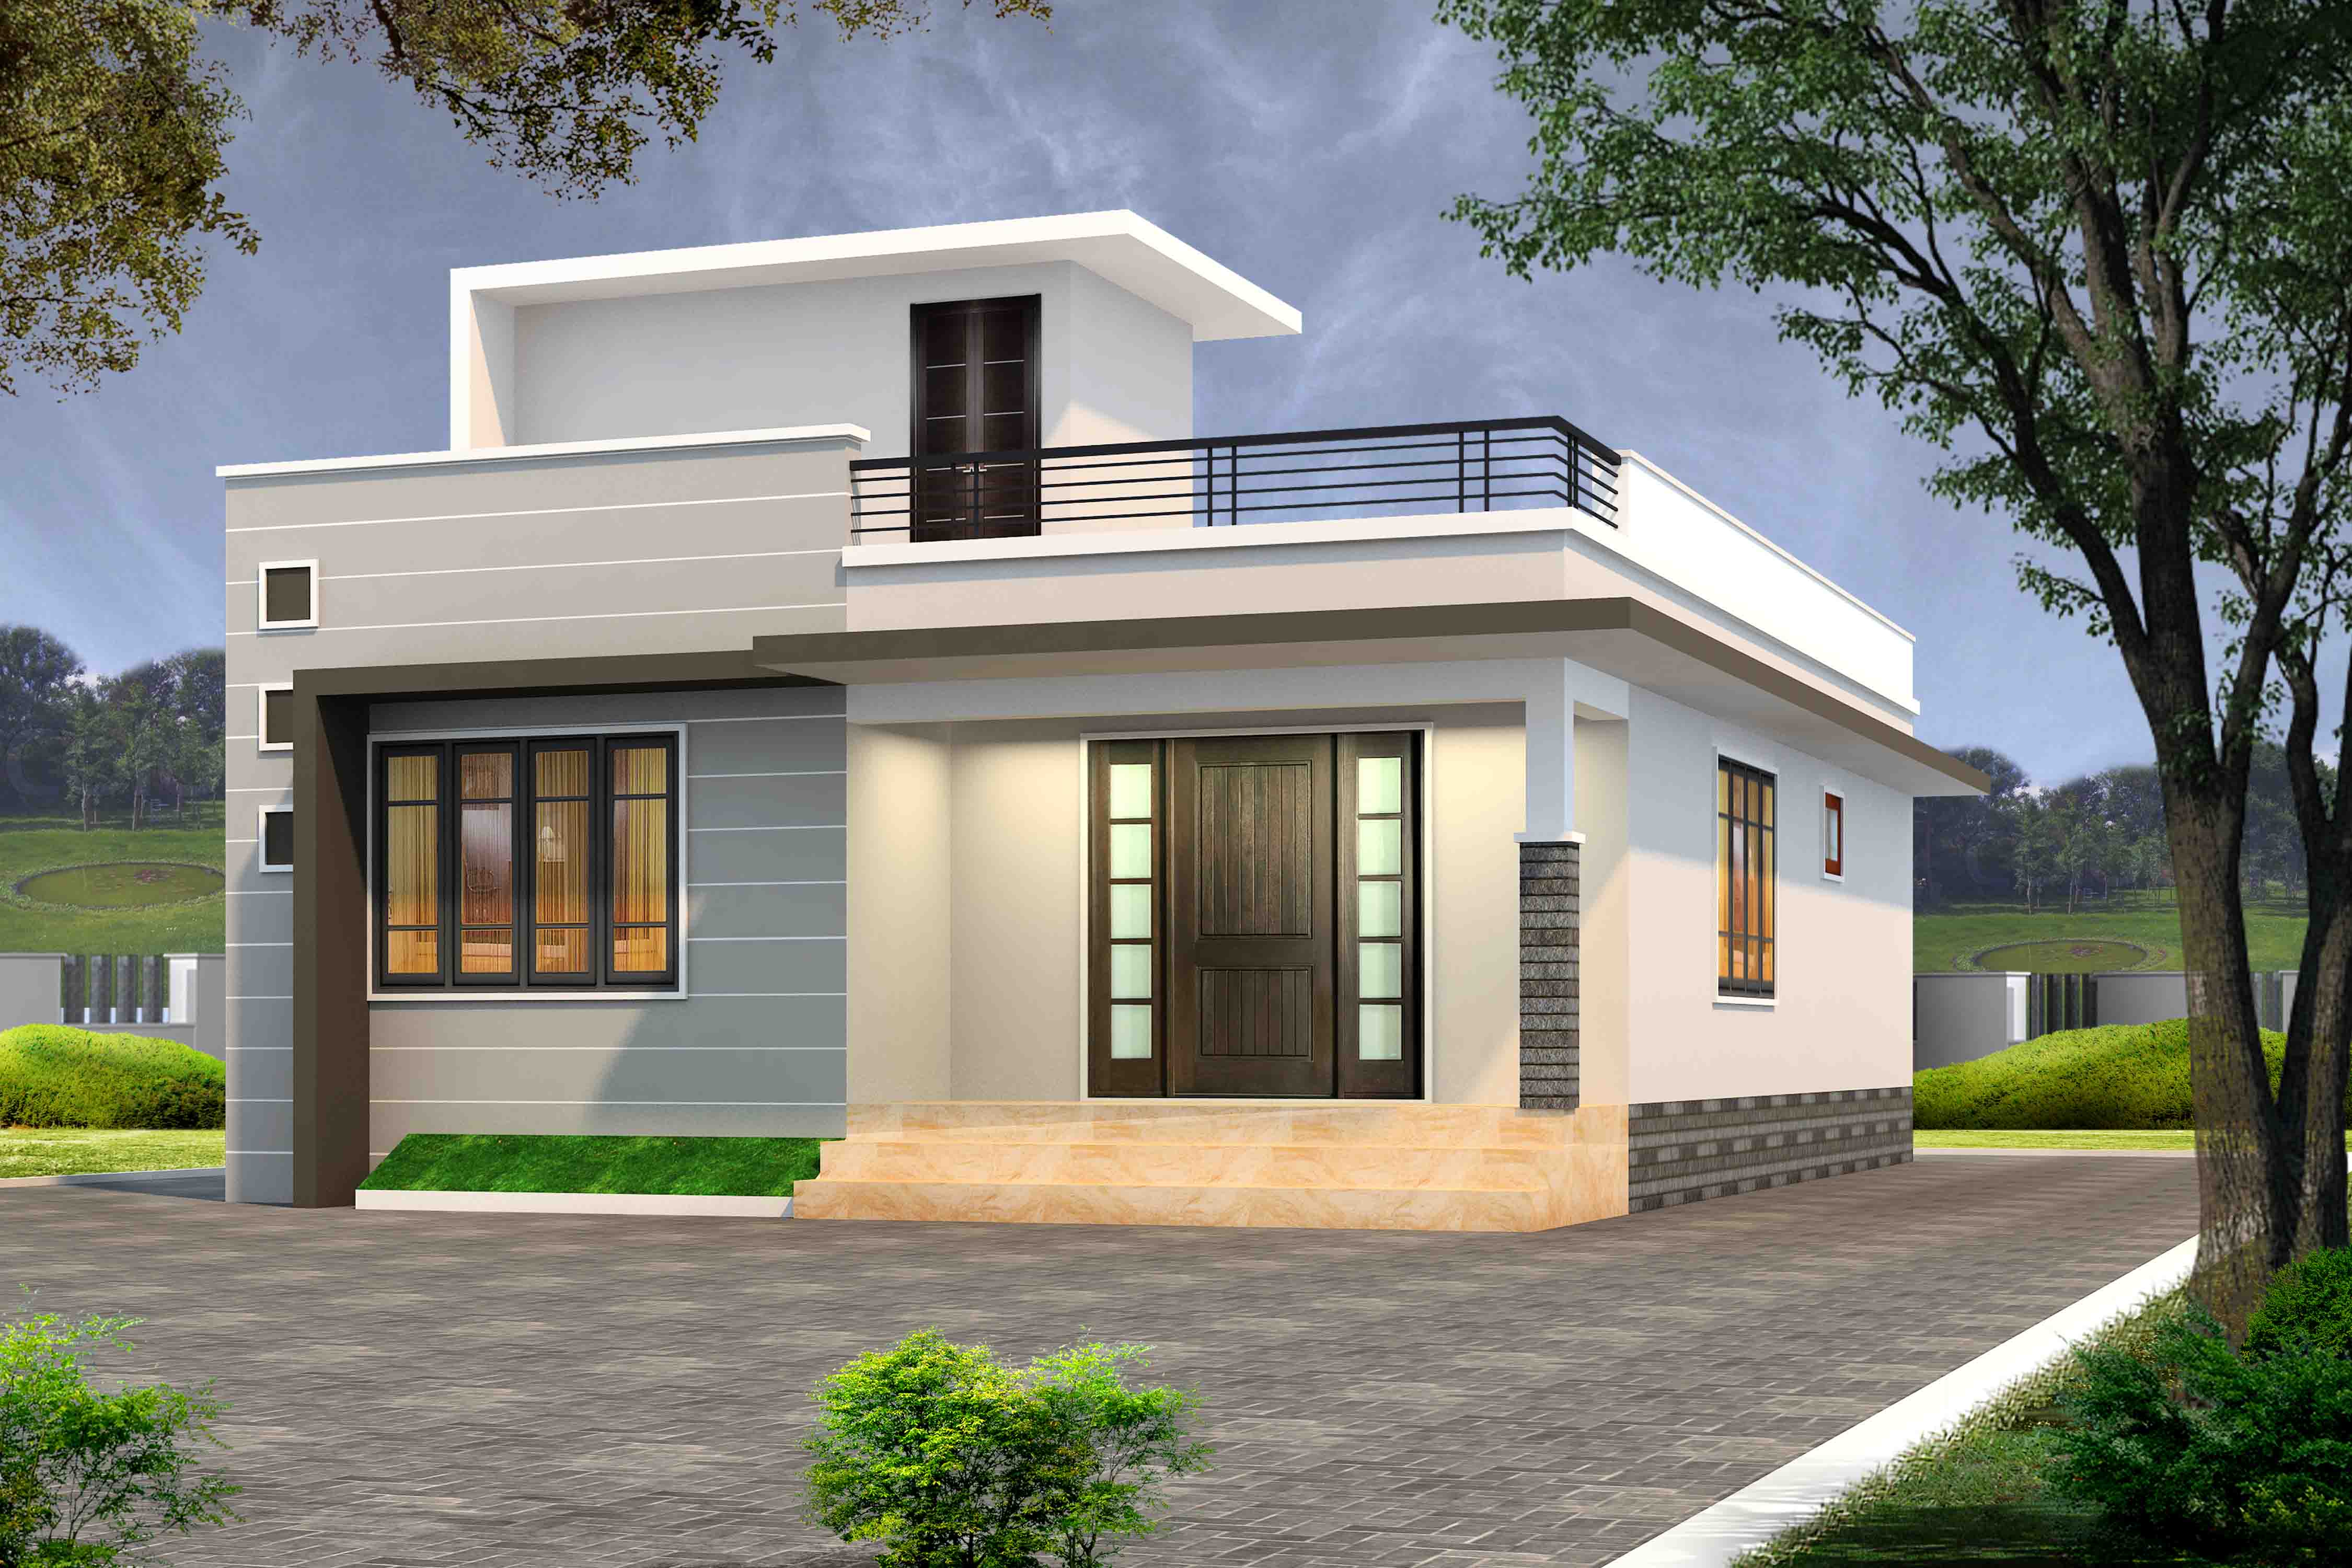 Small House Plans Small House Plans Under 1000 Sq Ft 1000 Sq Ft House Plans With Front Elevation